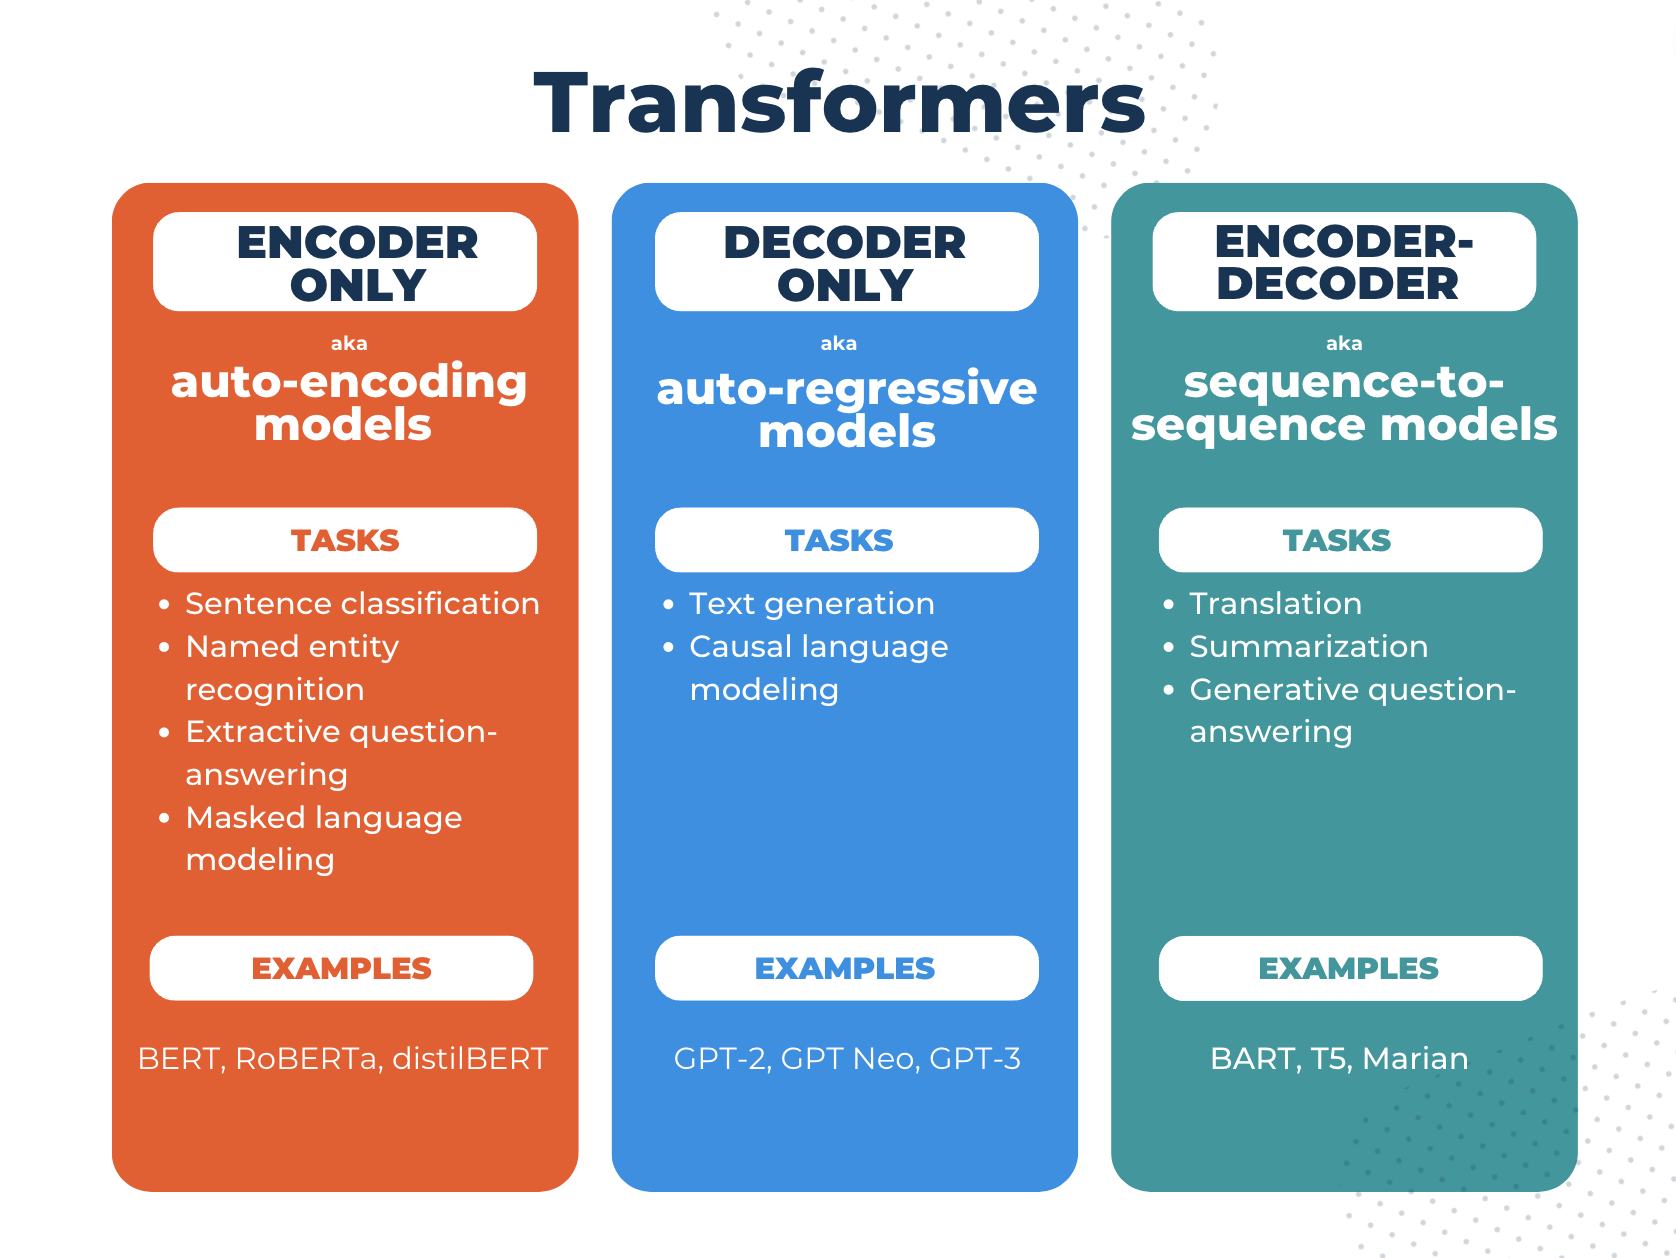 Chart showing the three different types of transformers: encoder-only, decoder-only, and encoder-decoder models. Chart also lists tasks specific to each type of transformer, as well as examples and alternative names.